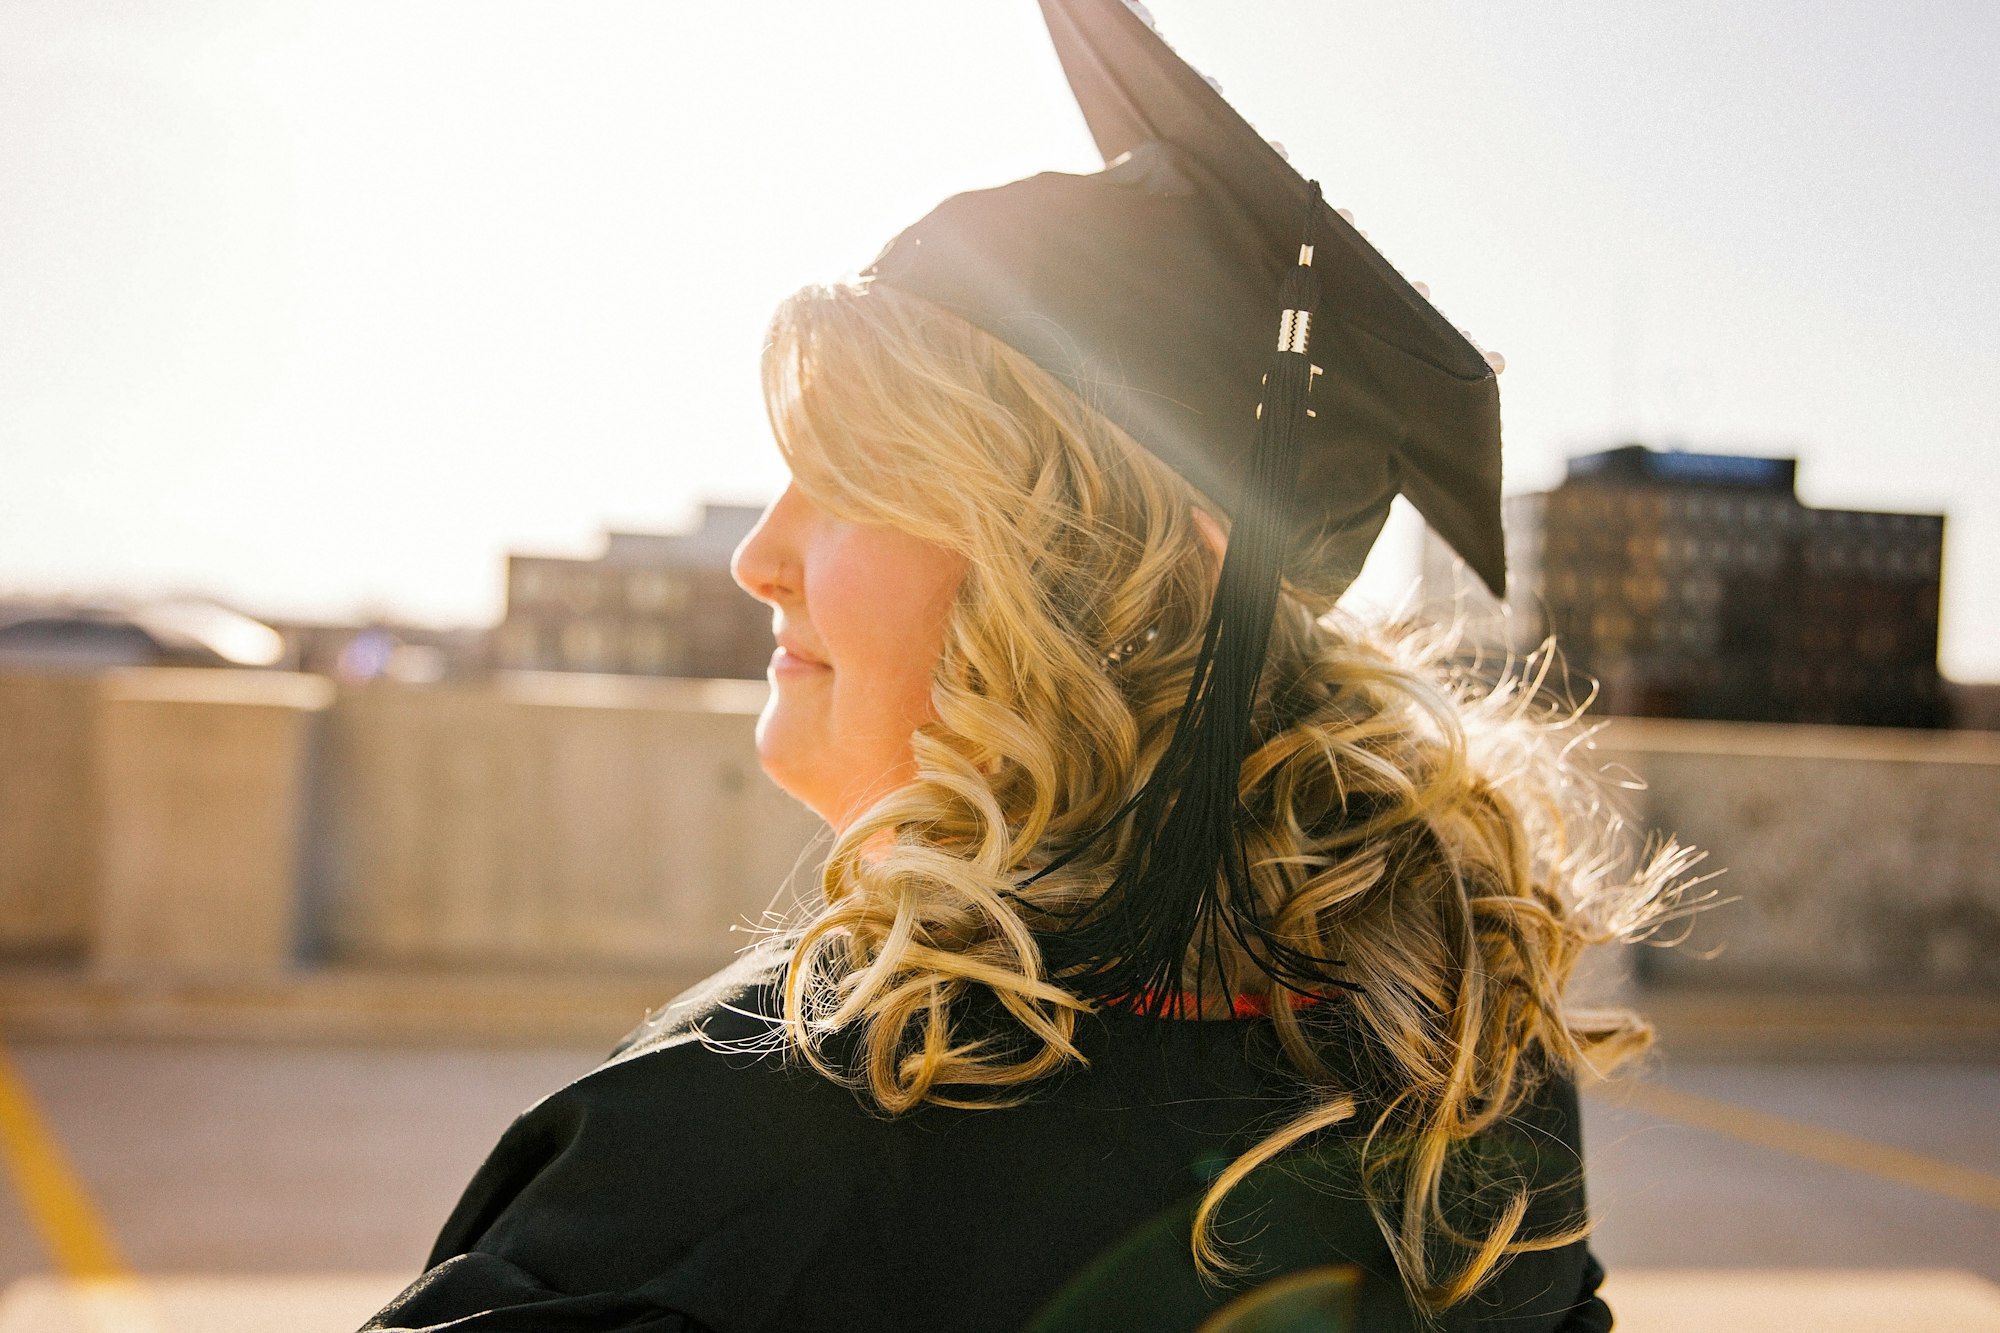 A student on her graduation day looking into the sunset.